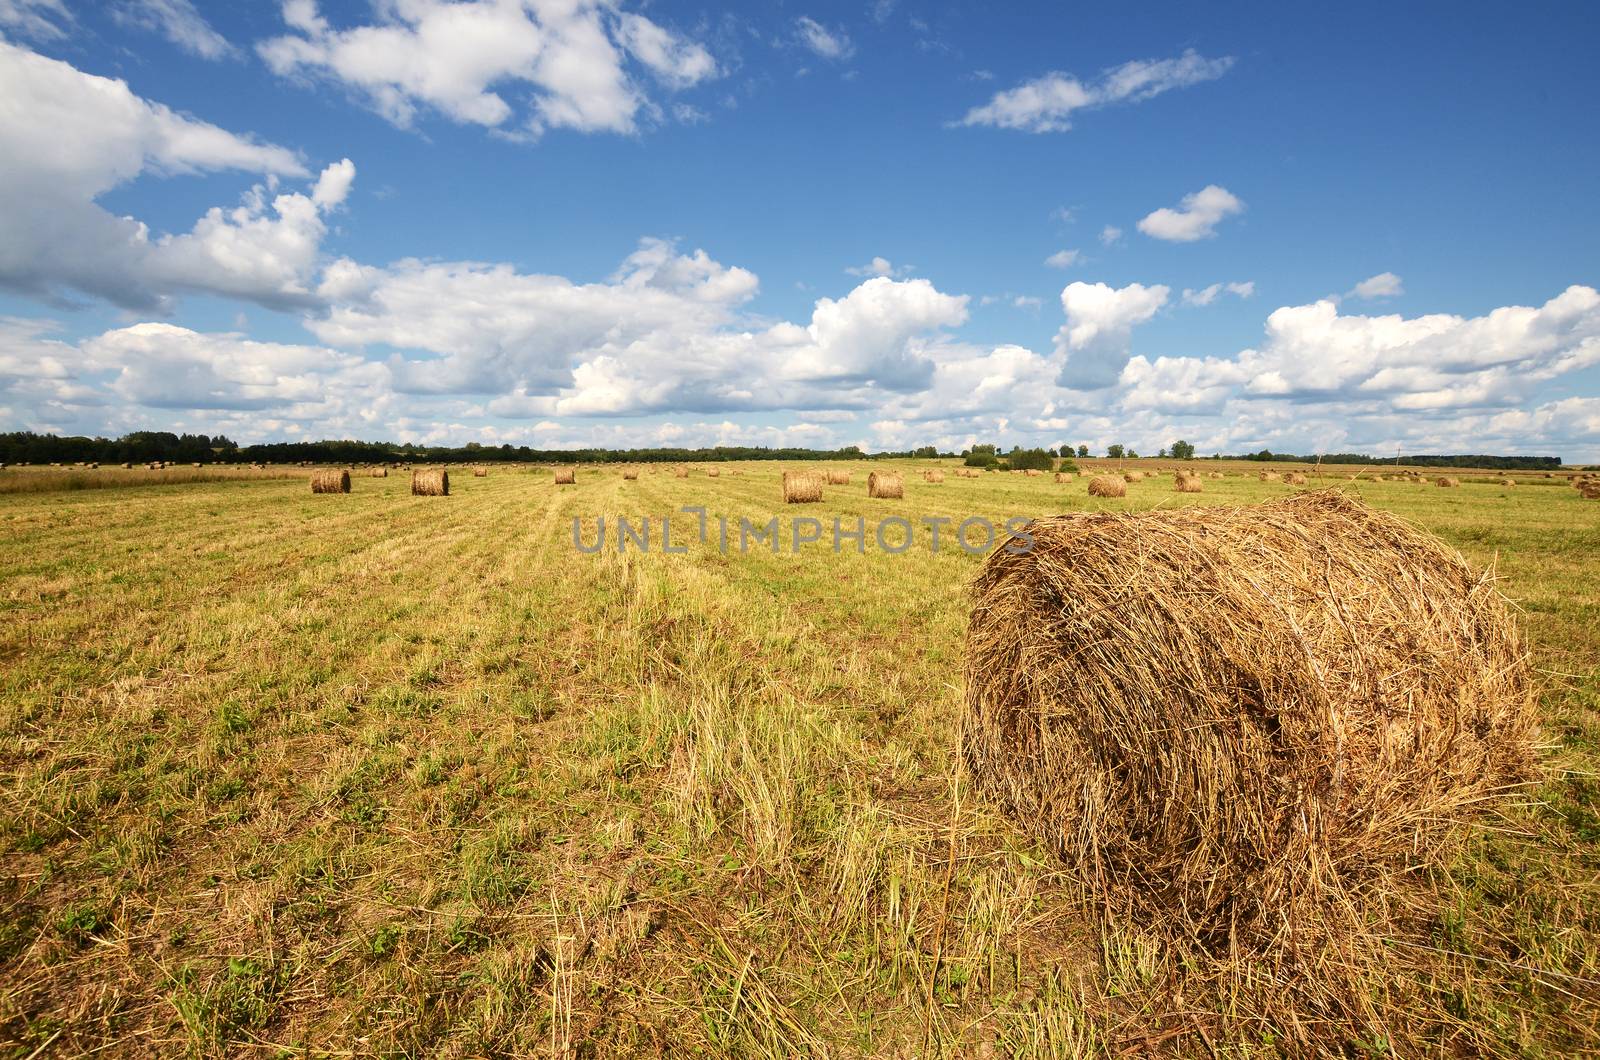 Round straw bales in harvested fields under blue sky